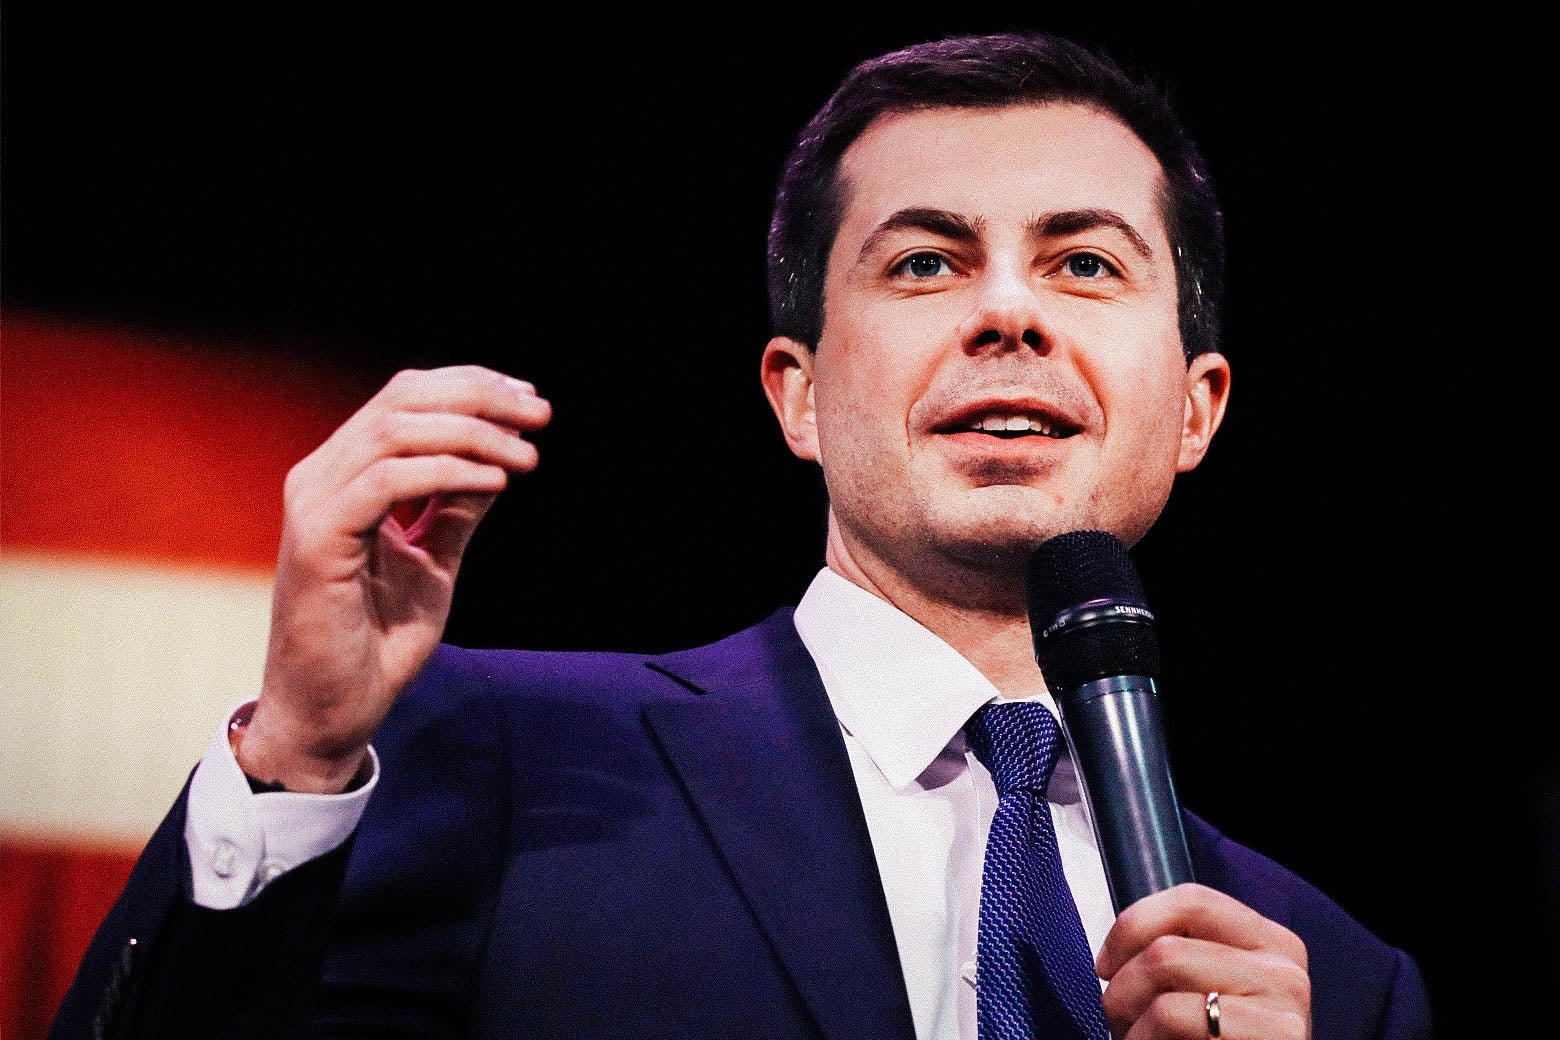 Pete Buttigieg holding a mic and speaking with an American flag in the background